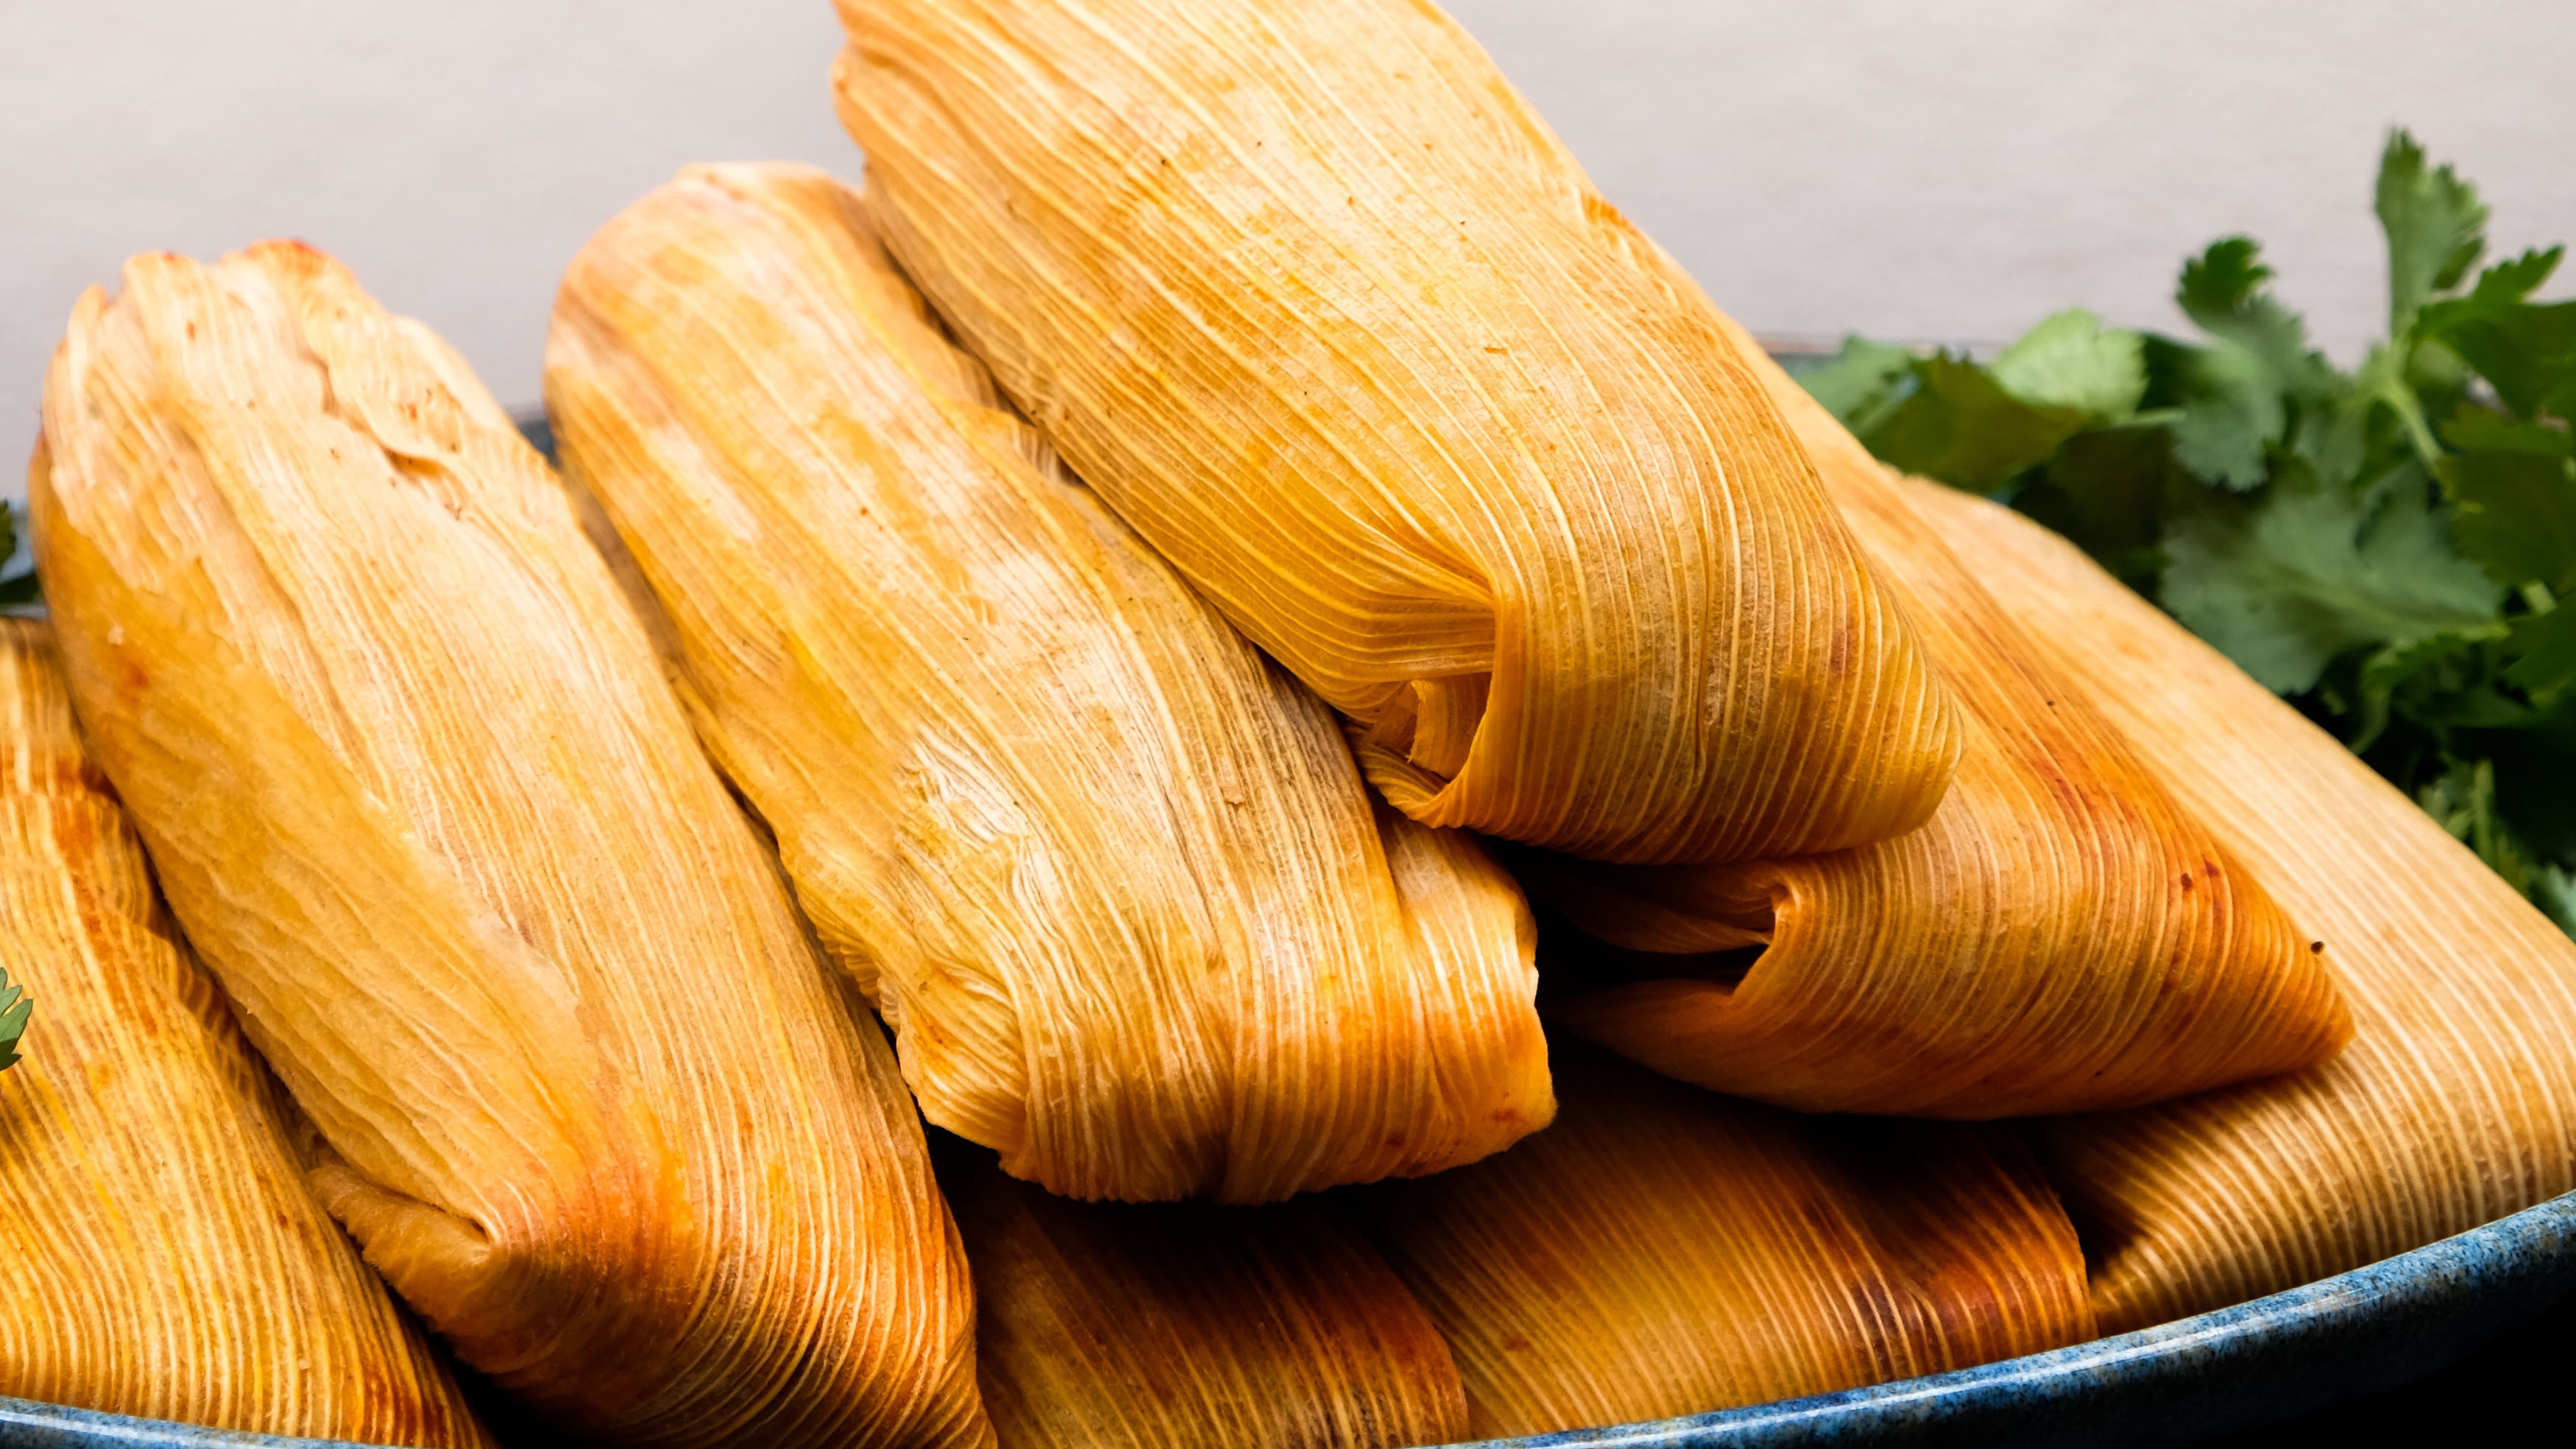 Red Chile Pork Tamales by the Dozen